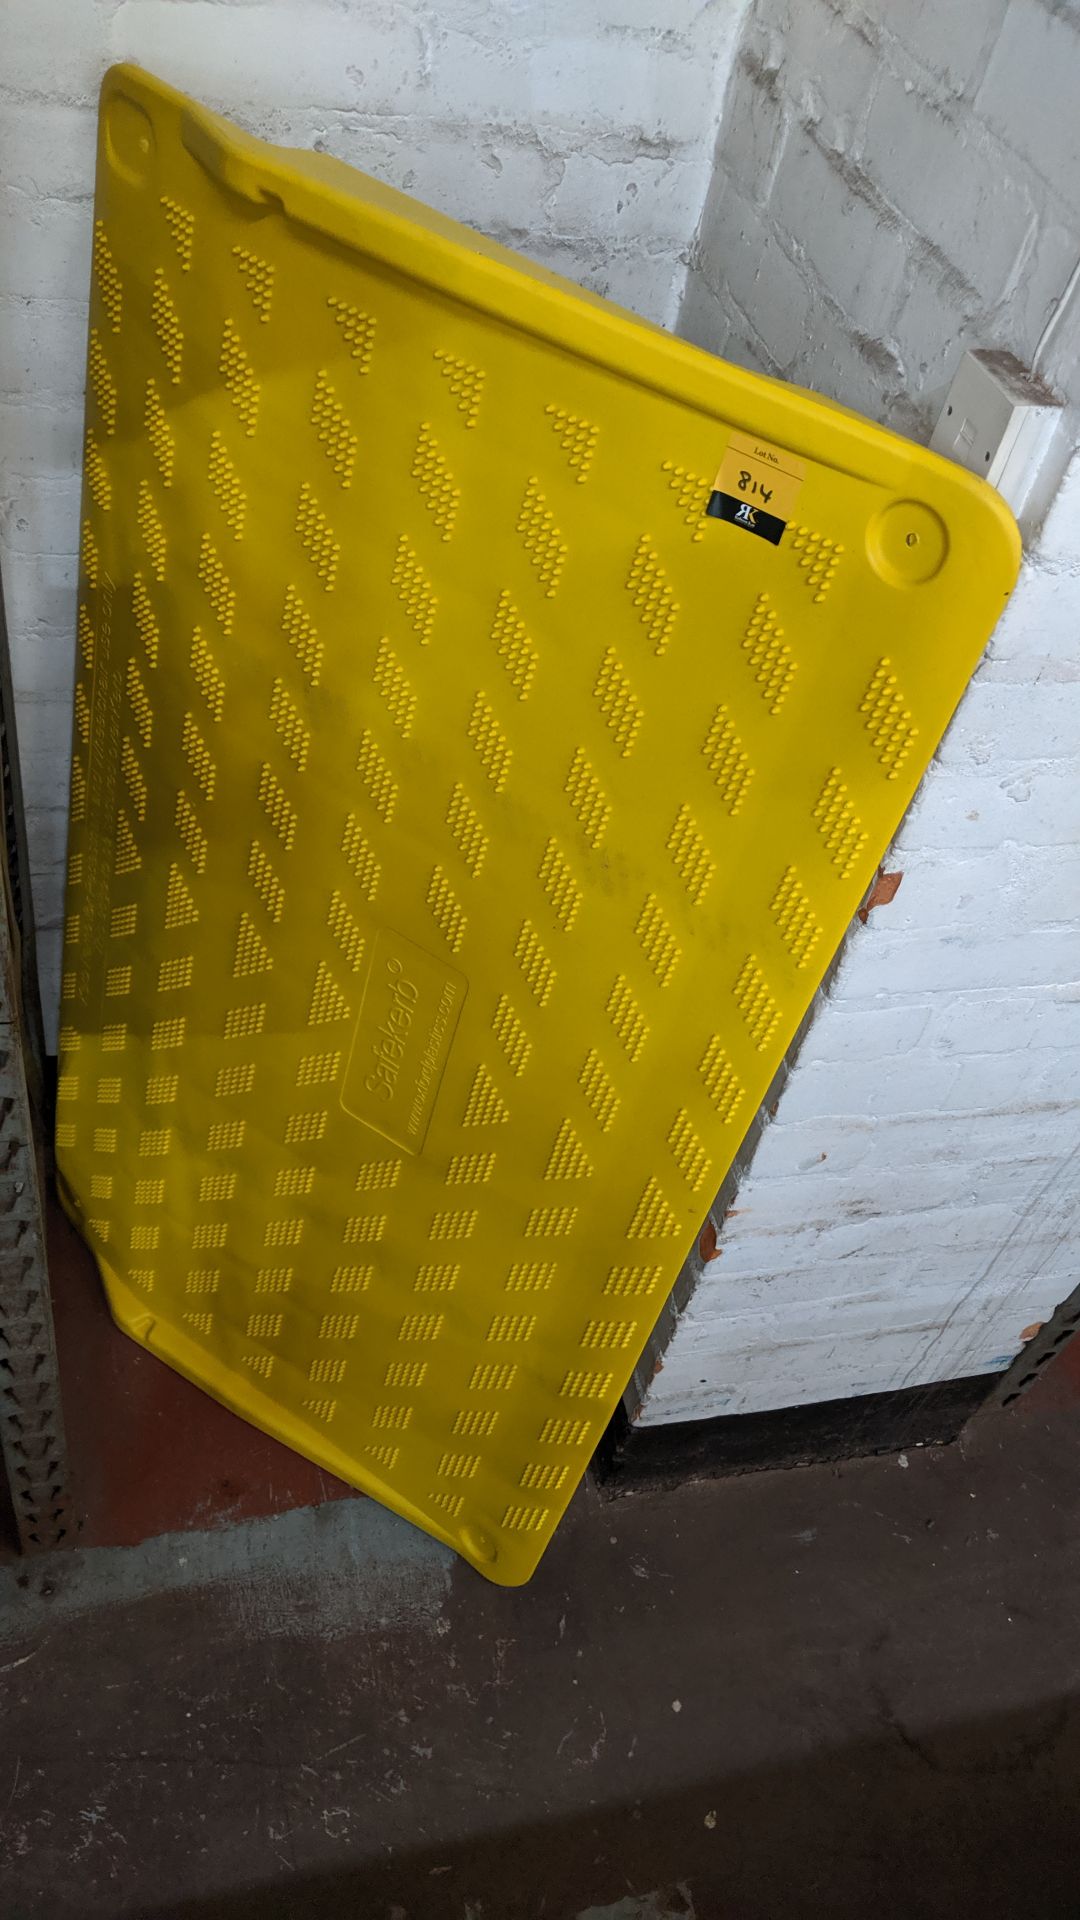 SafeKerb large yellow panel by Oxford Plastics. This is one of a large number of lots used/owned - Image 2 of 3